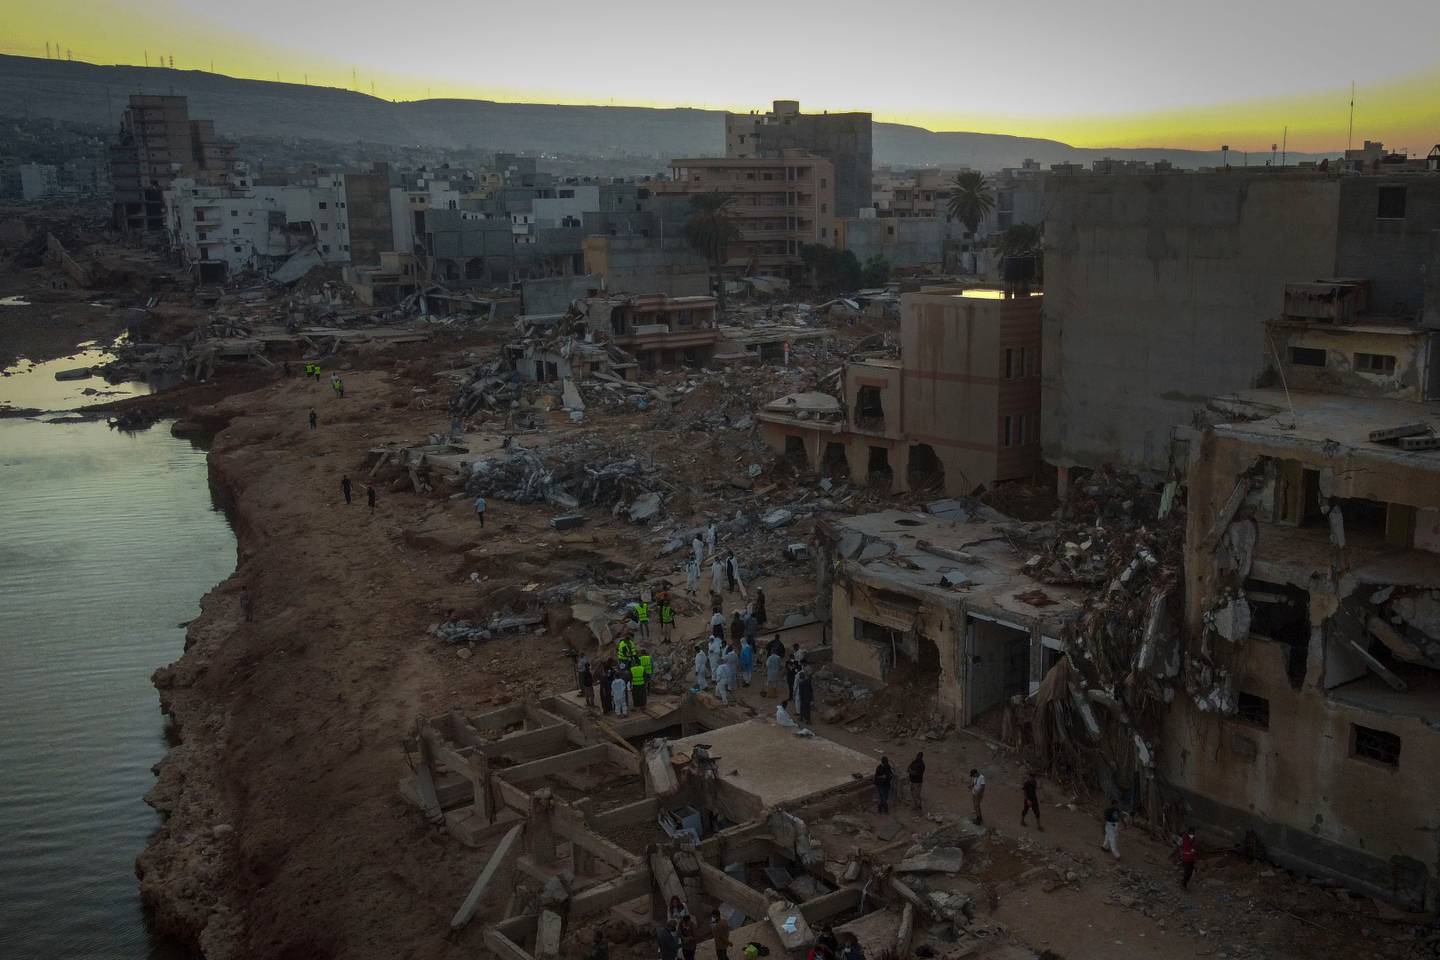 'It's hard to describe the smell of death': The National reports from Derna amid flood chaos